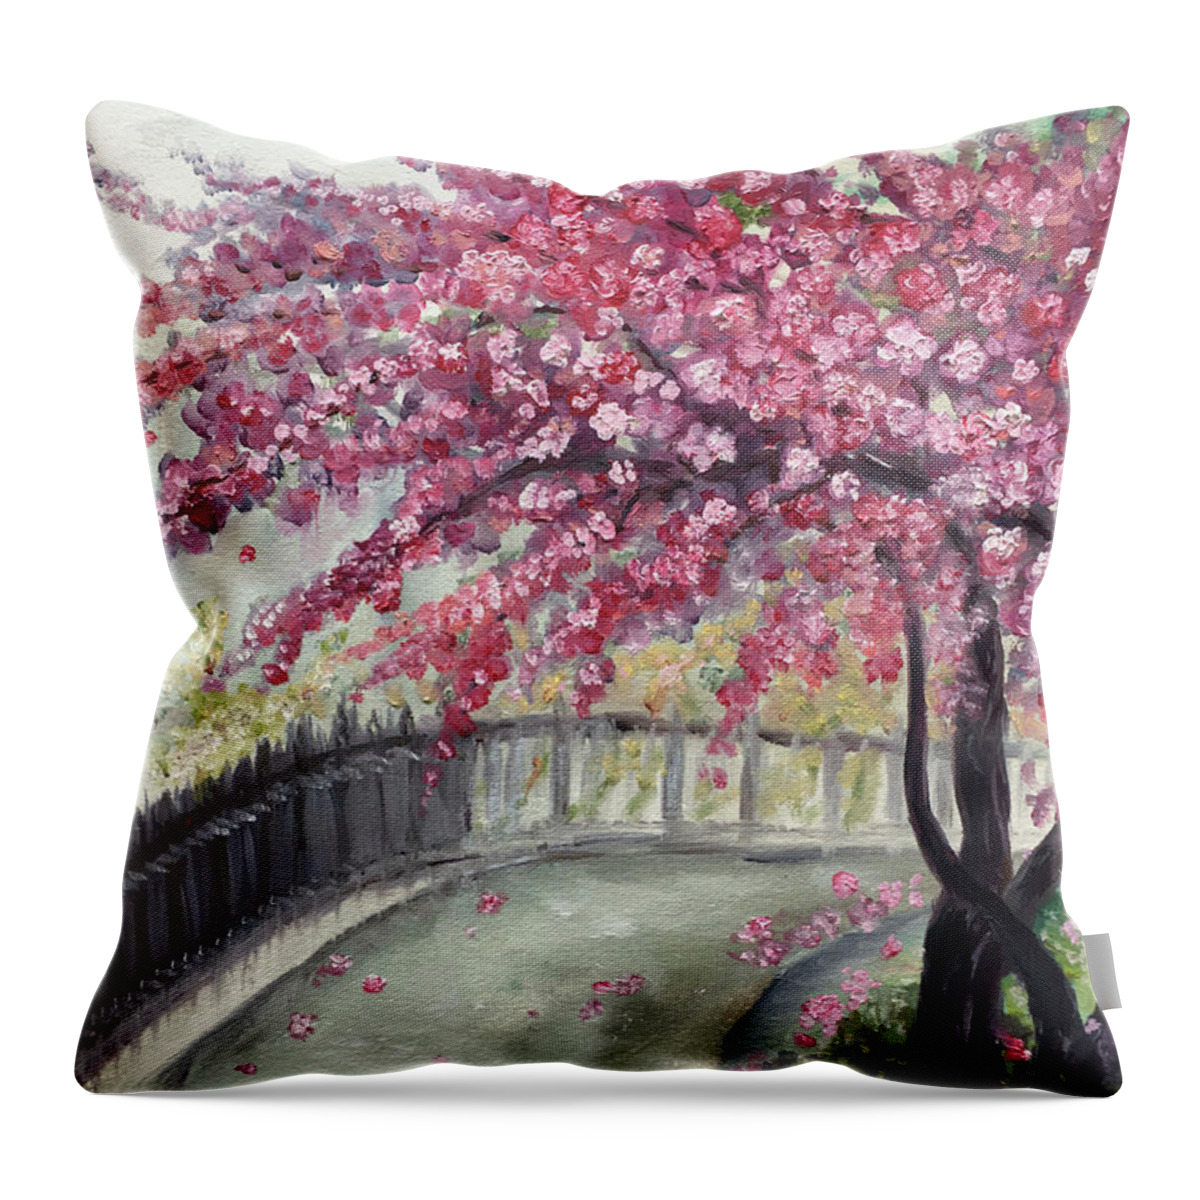 Paris Throw Pillow featuring the painting April in Paris Cherry Blossoms by Roxy Rich